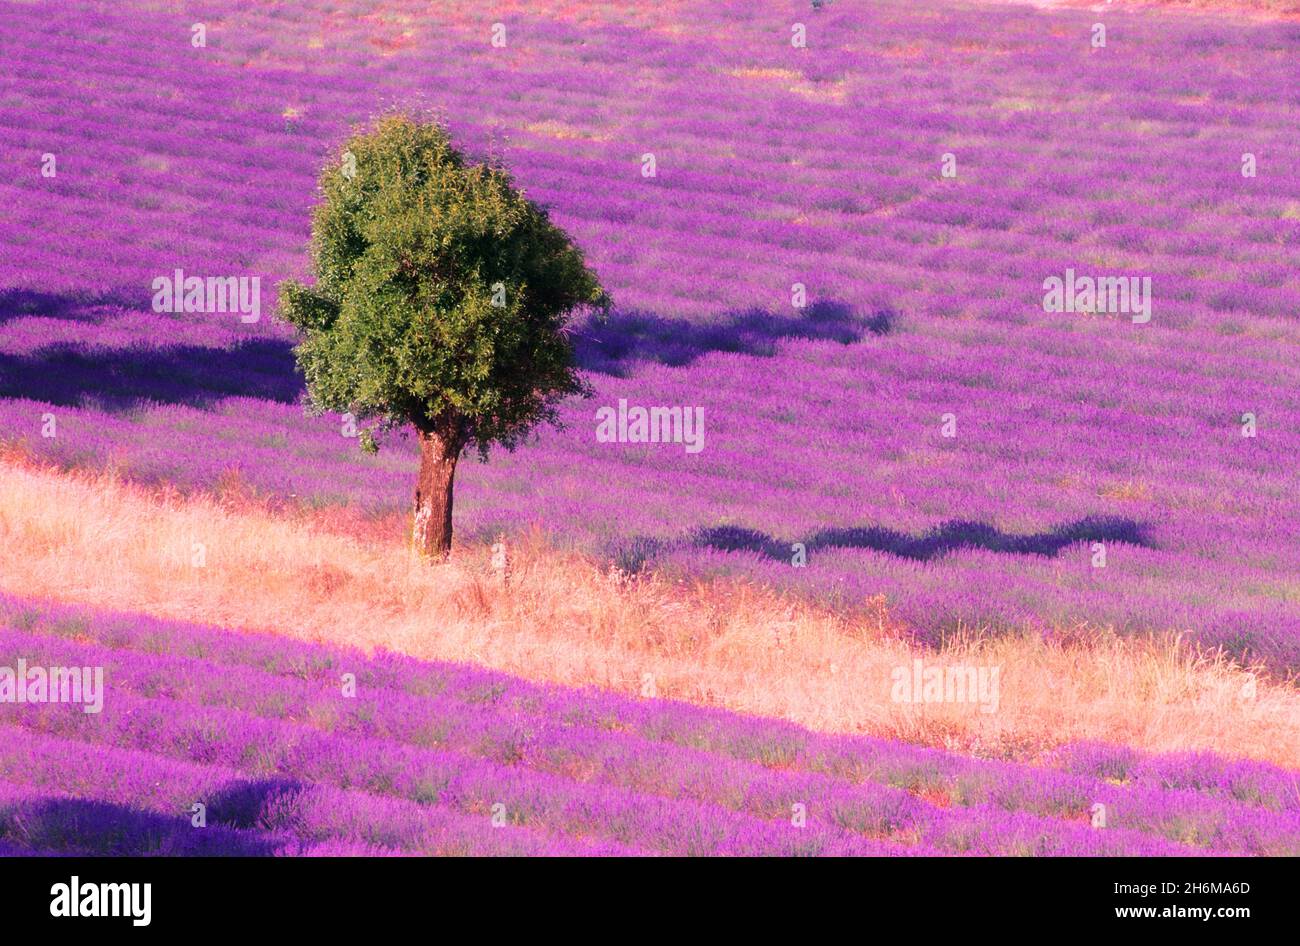 Tree in a Lavender Field Senanque, Provence, France Stock Photo